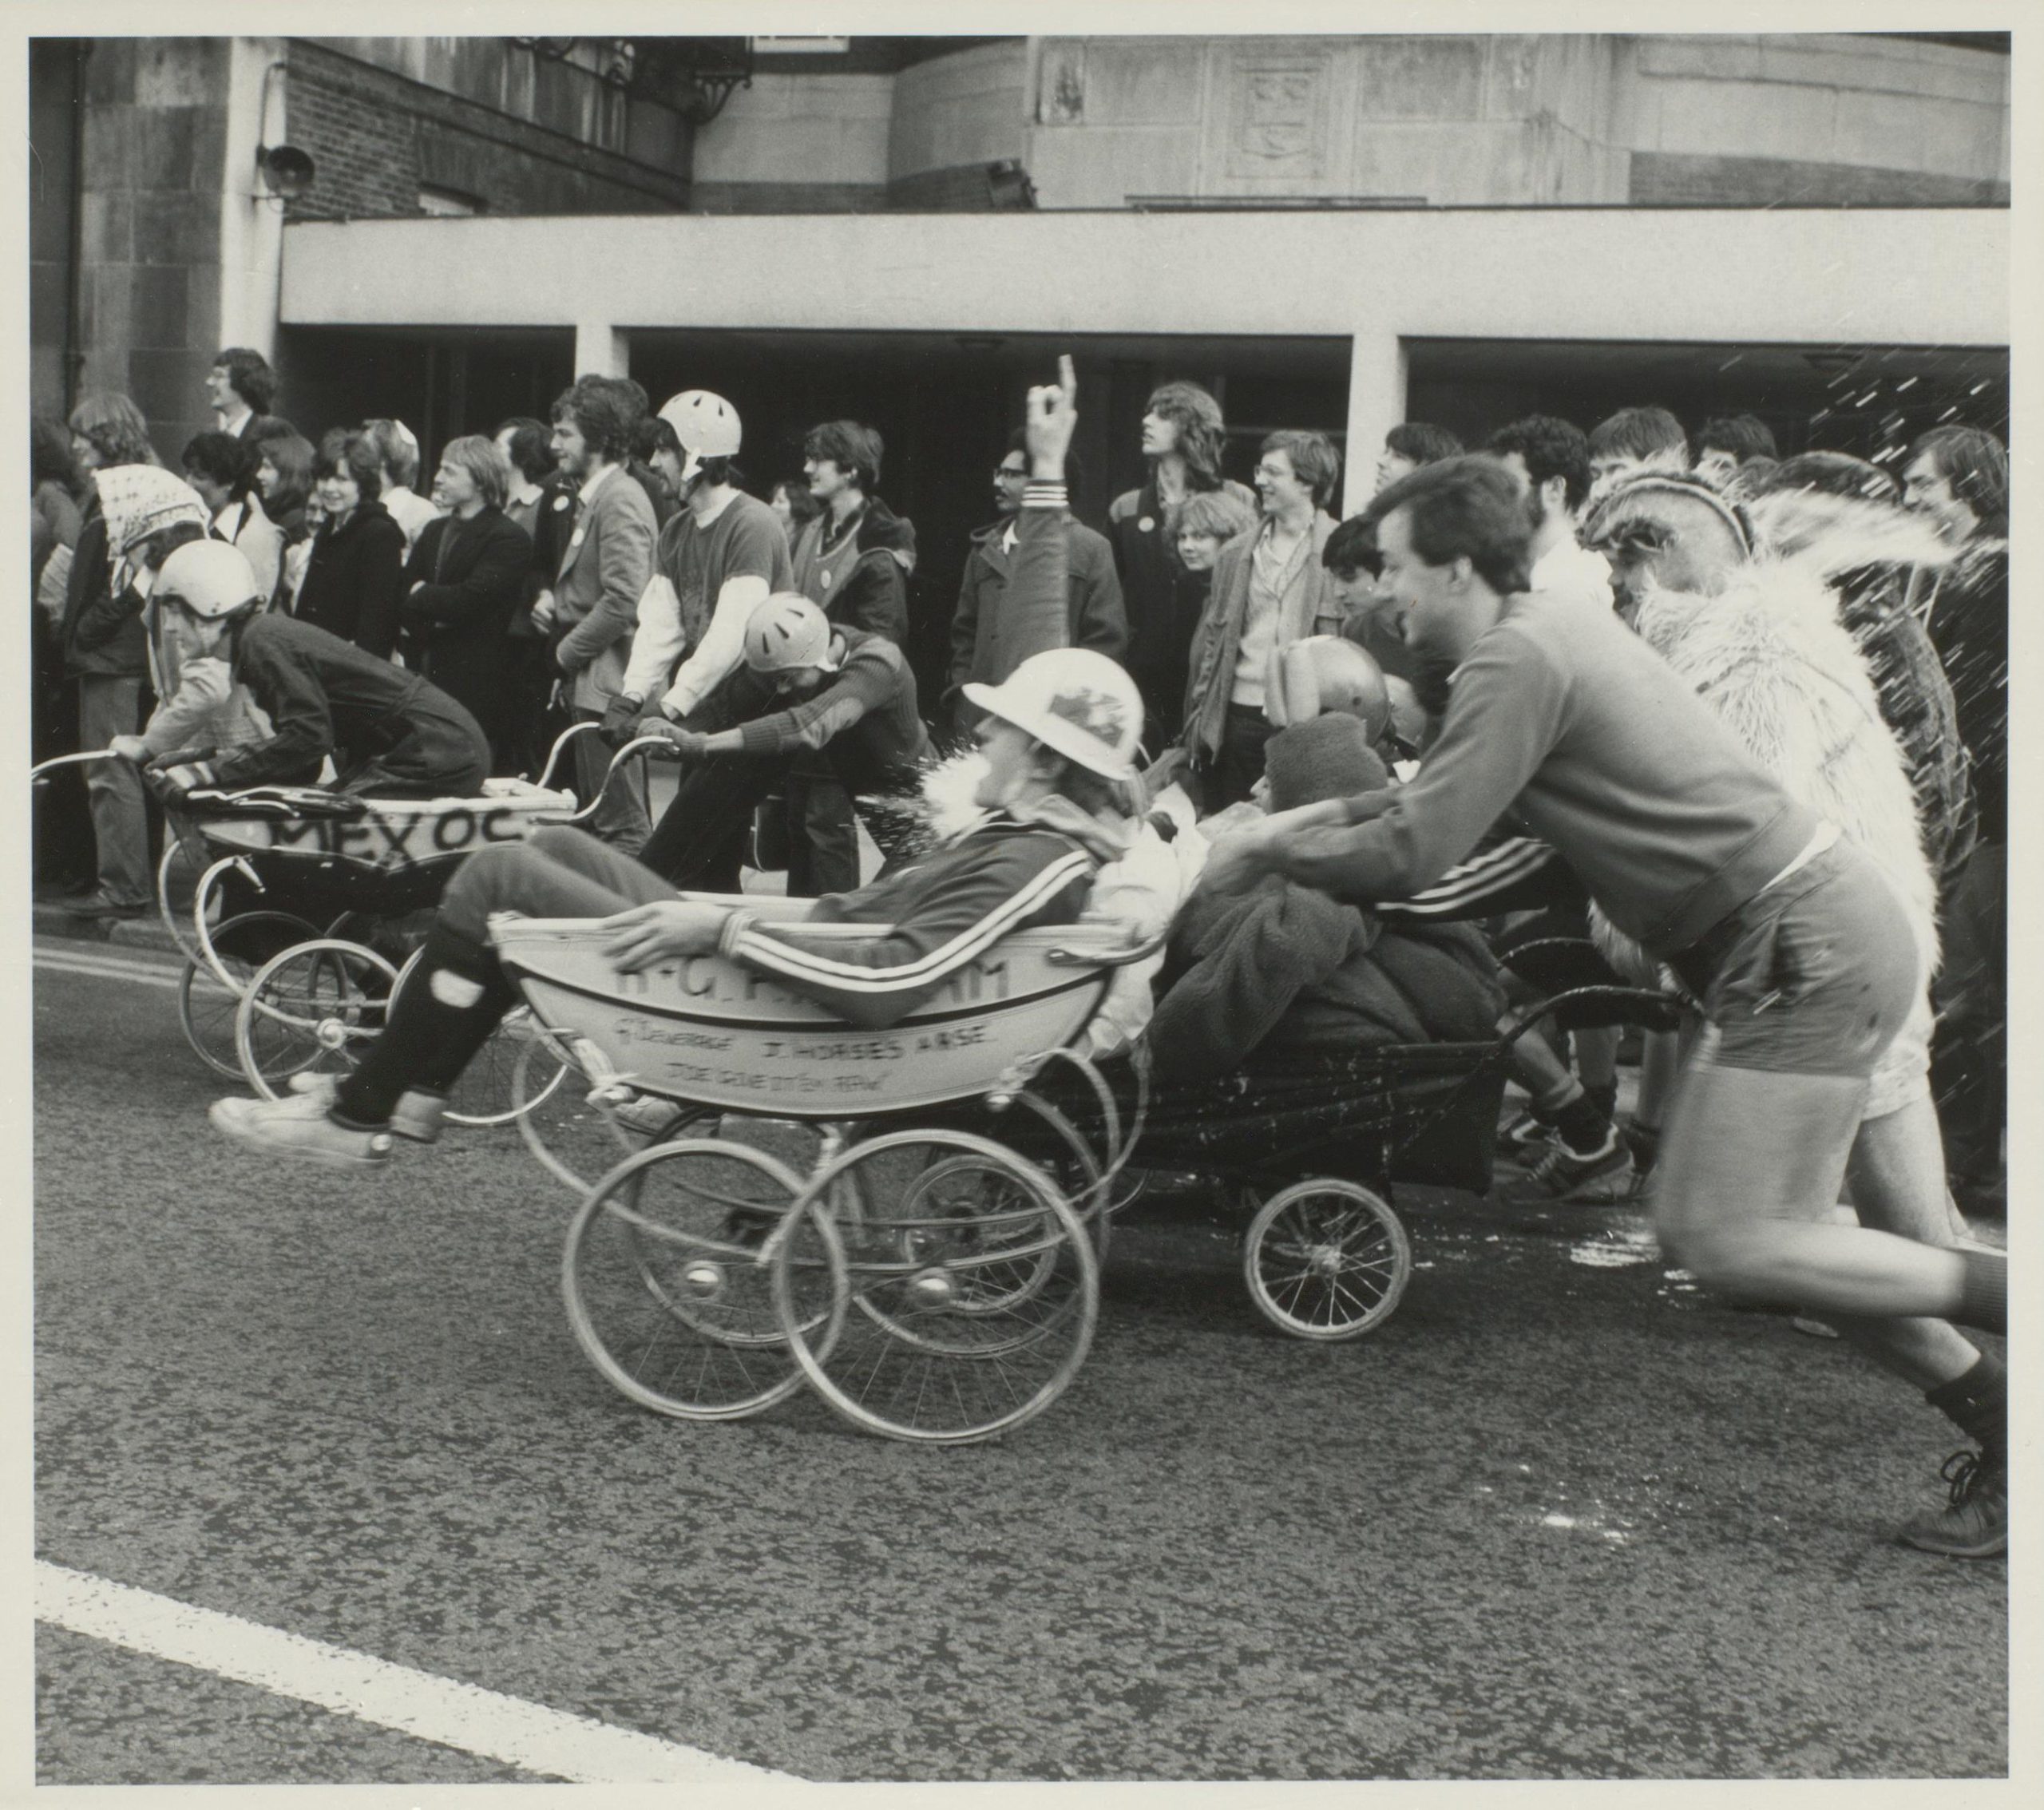 Photograph of University of Liverpool students joining in a pram race during Panto day.